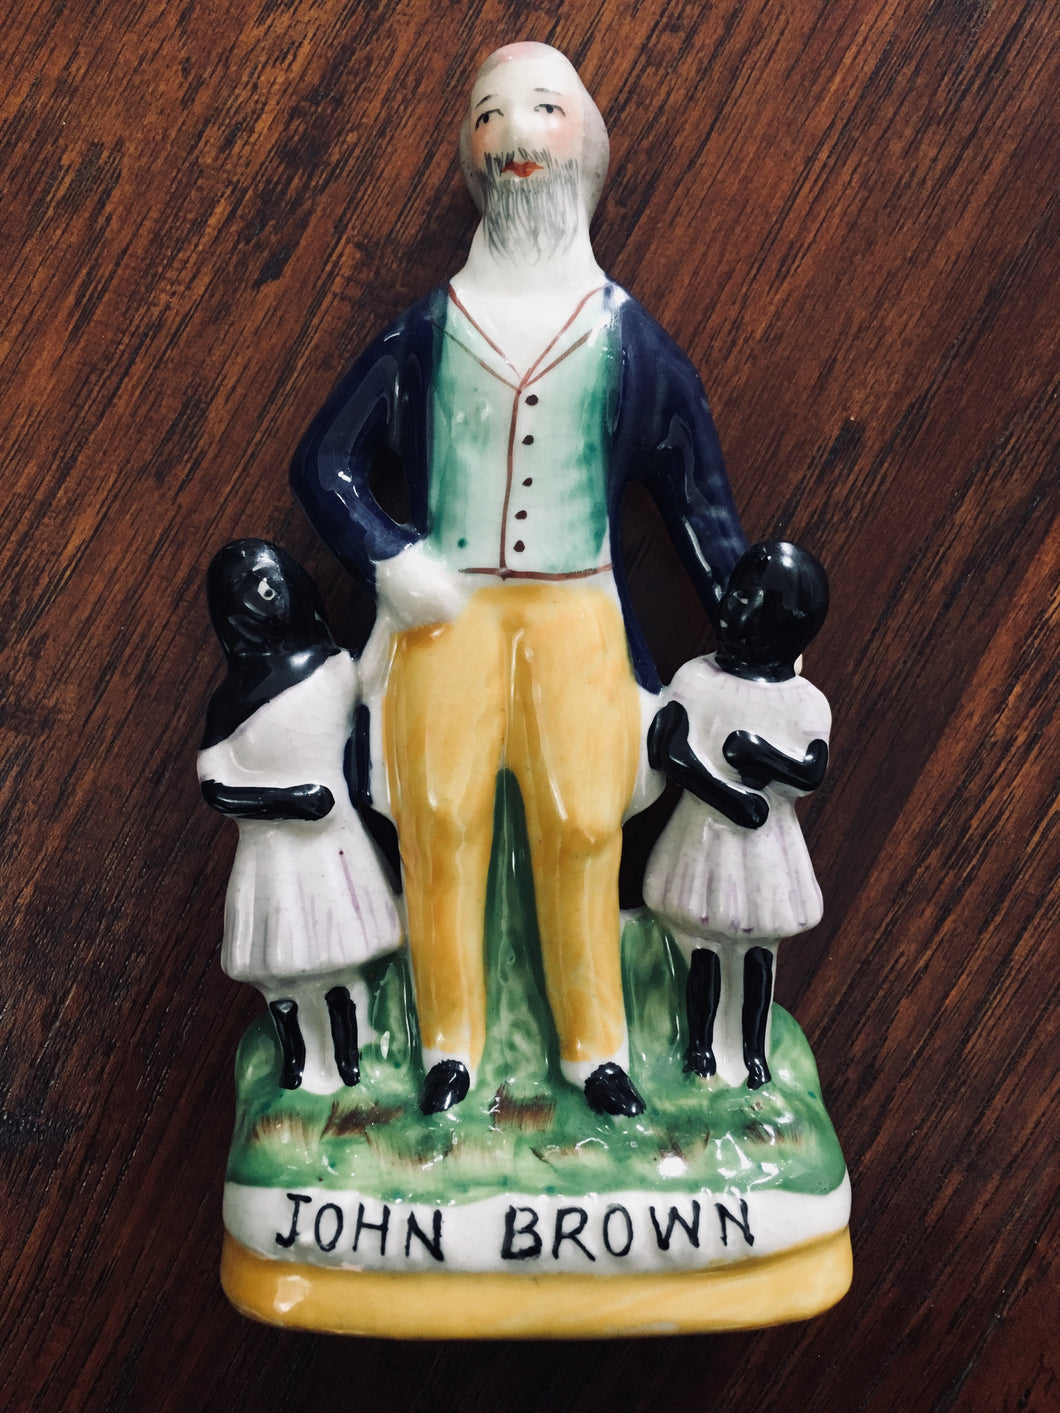 1860 JOHN BROWN. Rare Staffordshire Figure of Abolitionist, John Brown and Two Rescued Slave Children